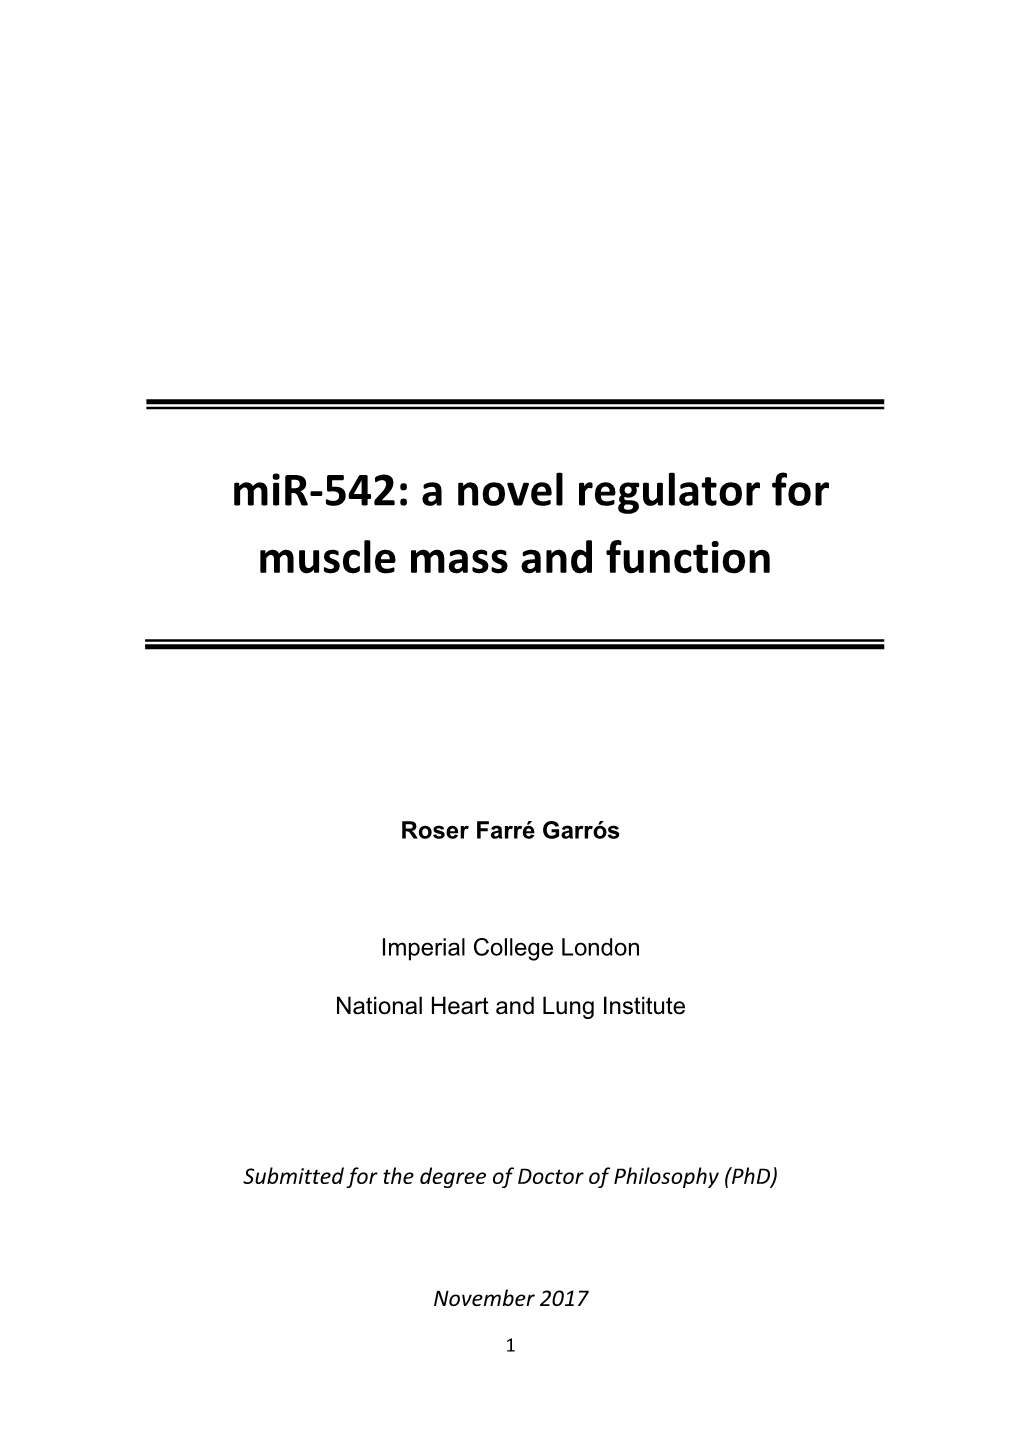 A Novel Regulator for Muscle Mass and Function